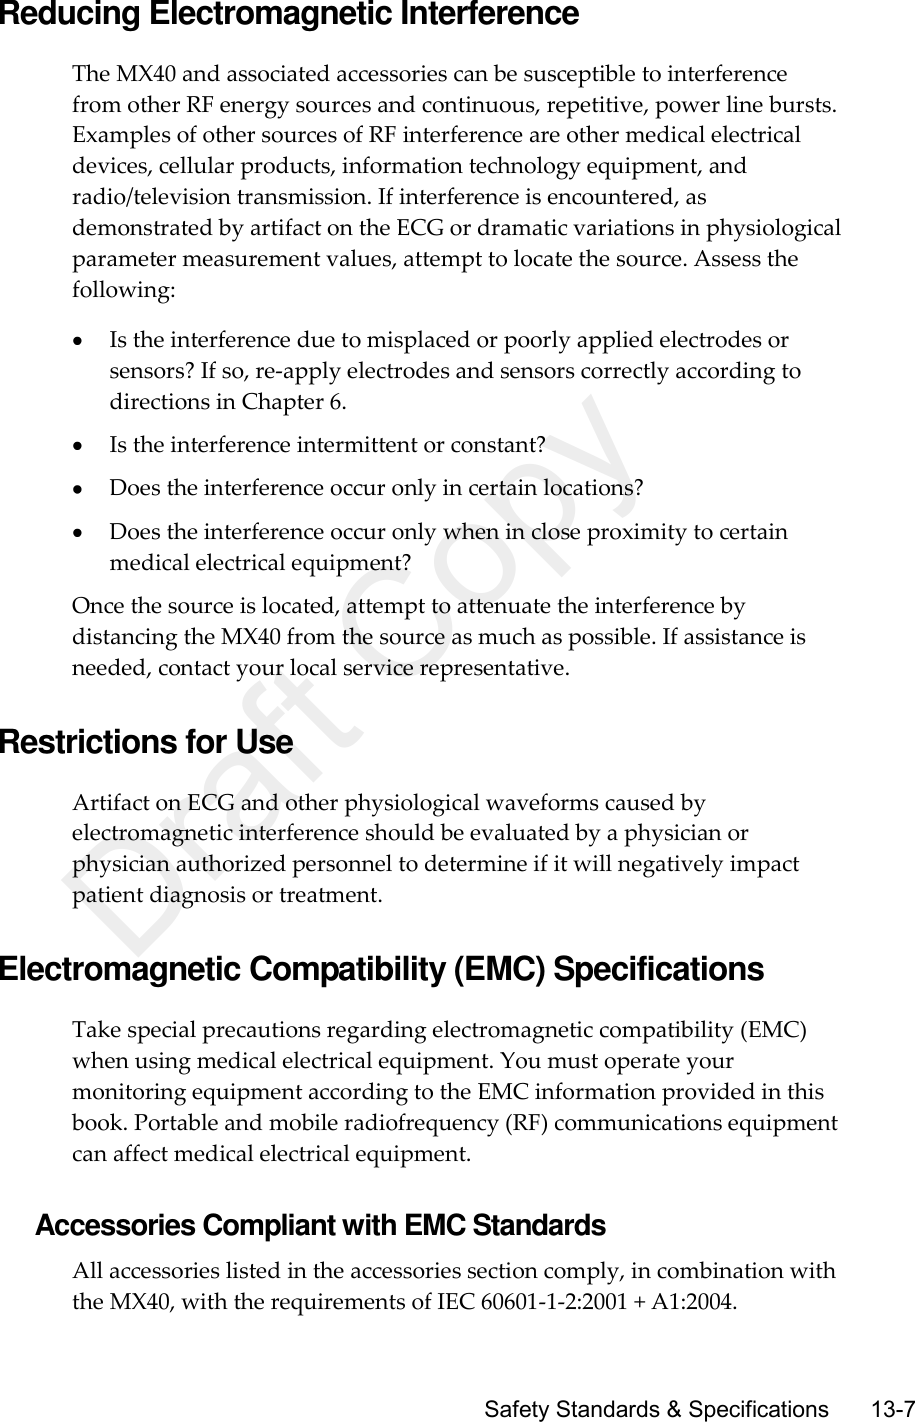      Safety Standards &amp; Specifications       13-7 Reducing Electromagnetic Interference The MX40 and associated accessories can be susceptible to interference from other RF energy sources and continuous, repetitive, power line bursts. Examples of other sources of RF interference are other medical electrical devices, cellular products, information technology equipment, and radio/television transmission. If interference is encountered, as demonstrated by artifact on the ECG or dramatic variations in physiological parameter measurement values, attempt to locate the source. Assess the following:  Is the interference due to misplaced or poorly applied electrodes or sensors? If so, re-apply electrodes and sensors correctly according to directions in Chapter 6.  Is the interference intermittent or constant?  Does the interference occur only in certain locations?  Does the interference occur only when in close proximity to certain medical electrical equipment? Once the source is located, attempt to attenuate the interference by distancing the MX40 from the source as much as possible. If assistance is needed, contact your local service representative.  Restrictions for Use Artifact on ECG and other physiological waveforms caused by electromagnetic interference should be evaluated by a physician or physician authorized personnel to determine if it will negatively impact patient diagnosis or treatment.  Electromagnetic Compatibility (EMC) Specifications Take special precautions regarding electromagnetic compatibility (EMC) when using medical electrical equipment. You must operate your monitoring equipment according to the EMC information provided in this book. Portable and mobile radiofrequency (RF) communications equipment can affect medical electrical equipment.  Accessories Compliant with EMC Standards All accessories listed in the accessories section comply, in combination with the MX40, with the requirements of IEC 60601-1-2:2001 + A1:2004. Draft Copy